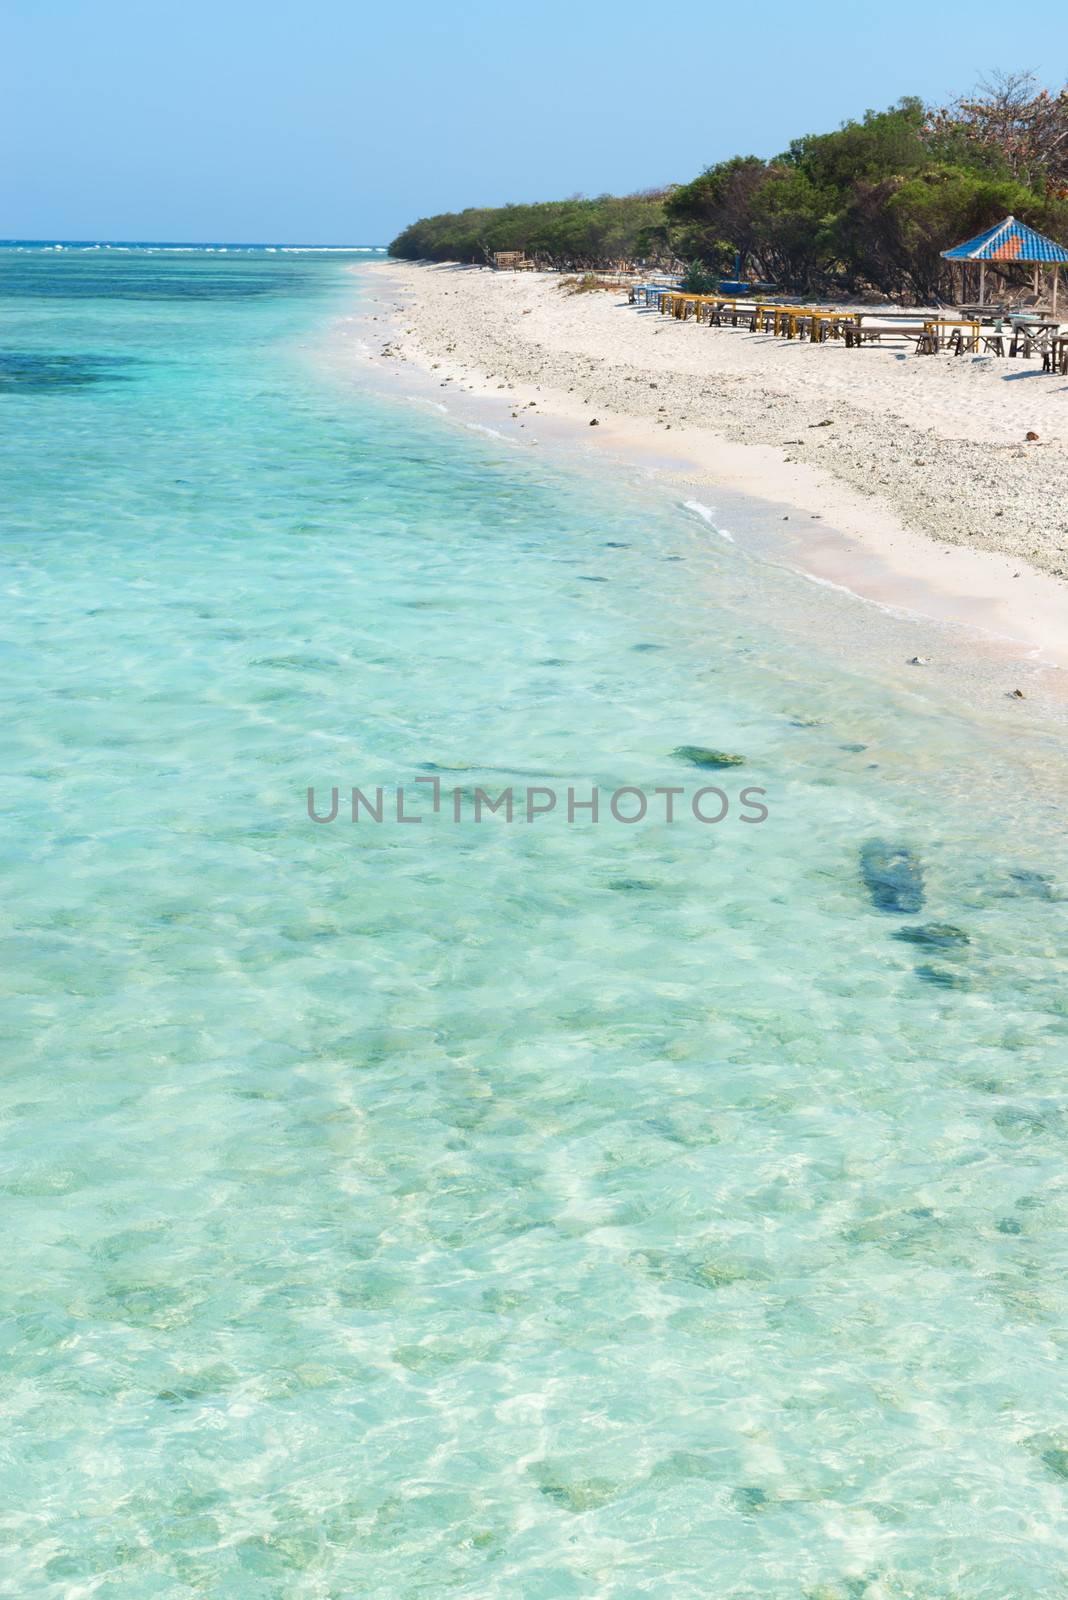 Beautiful beach with blue clean water and seaside cafe on tropical beach. Selective focus on front water.